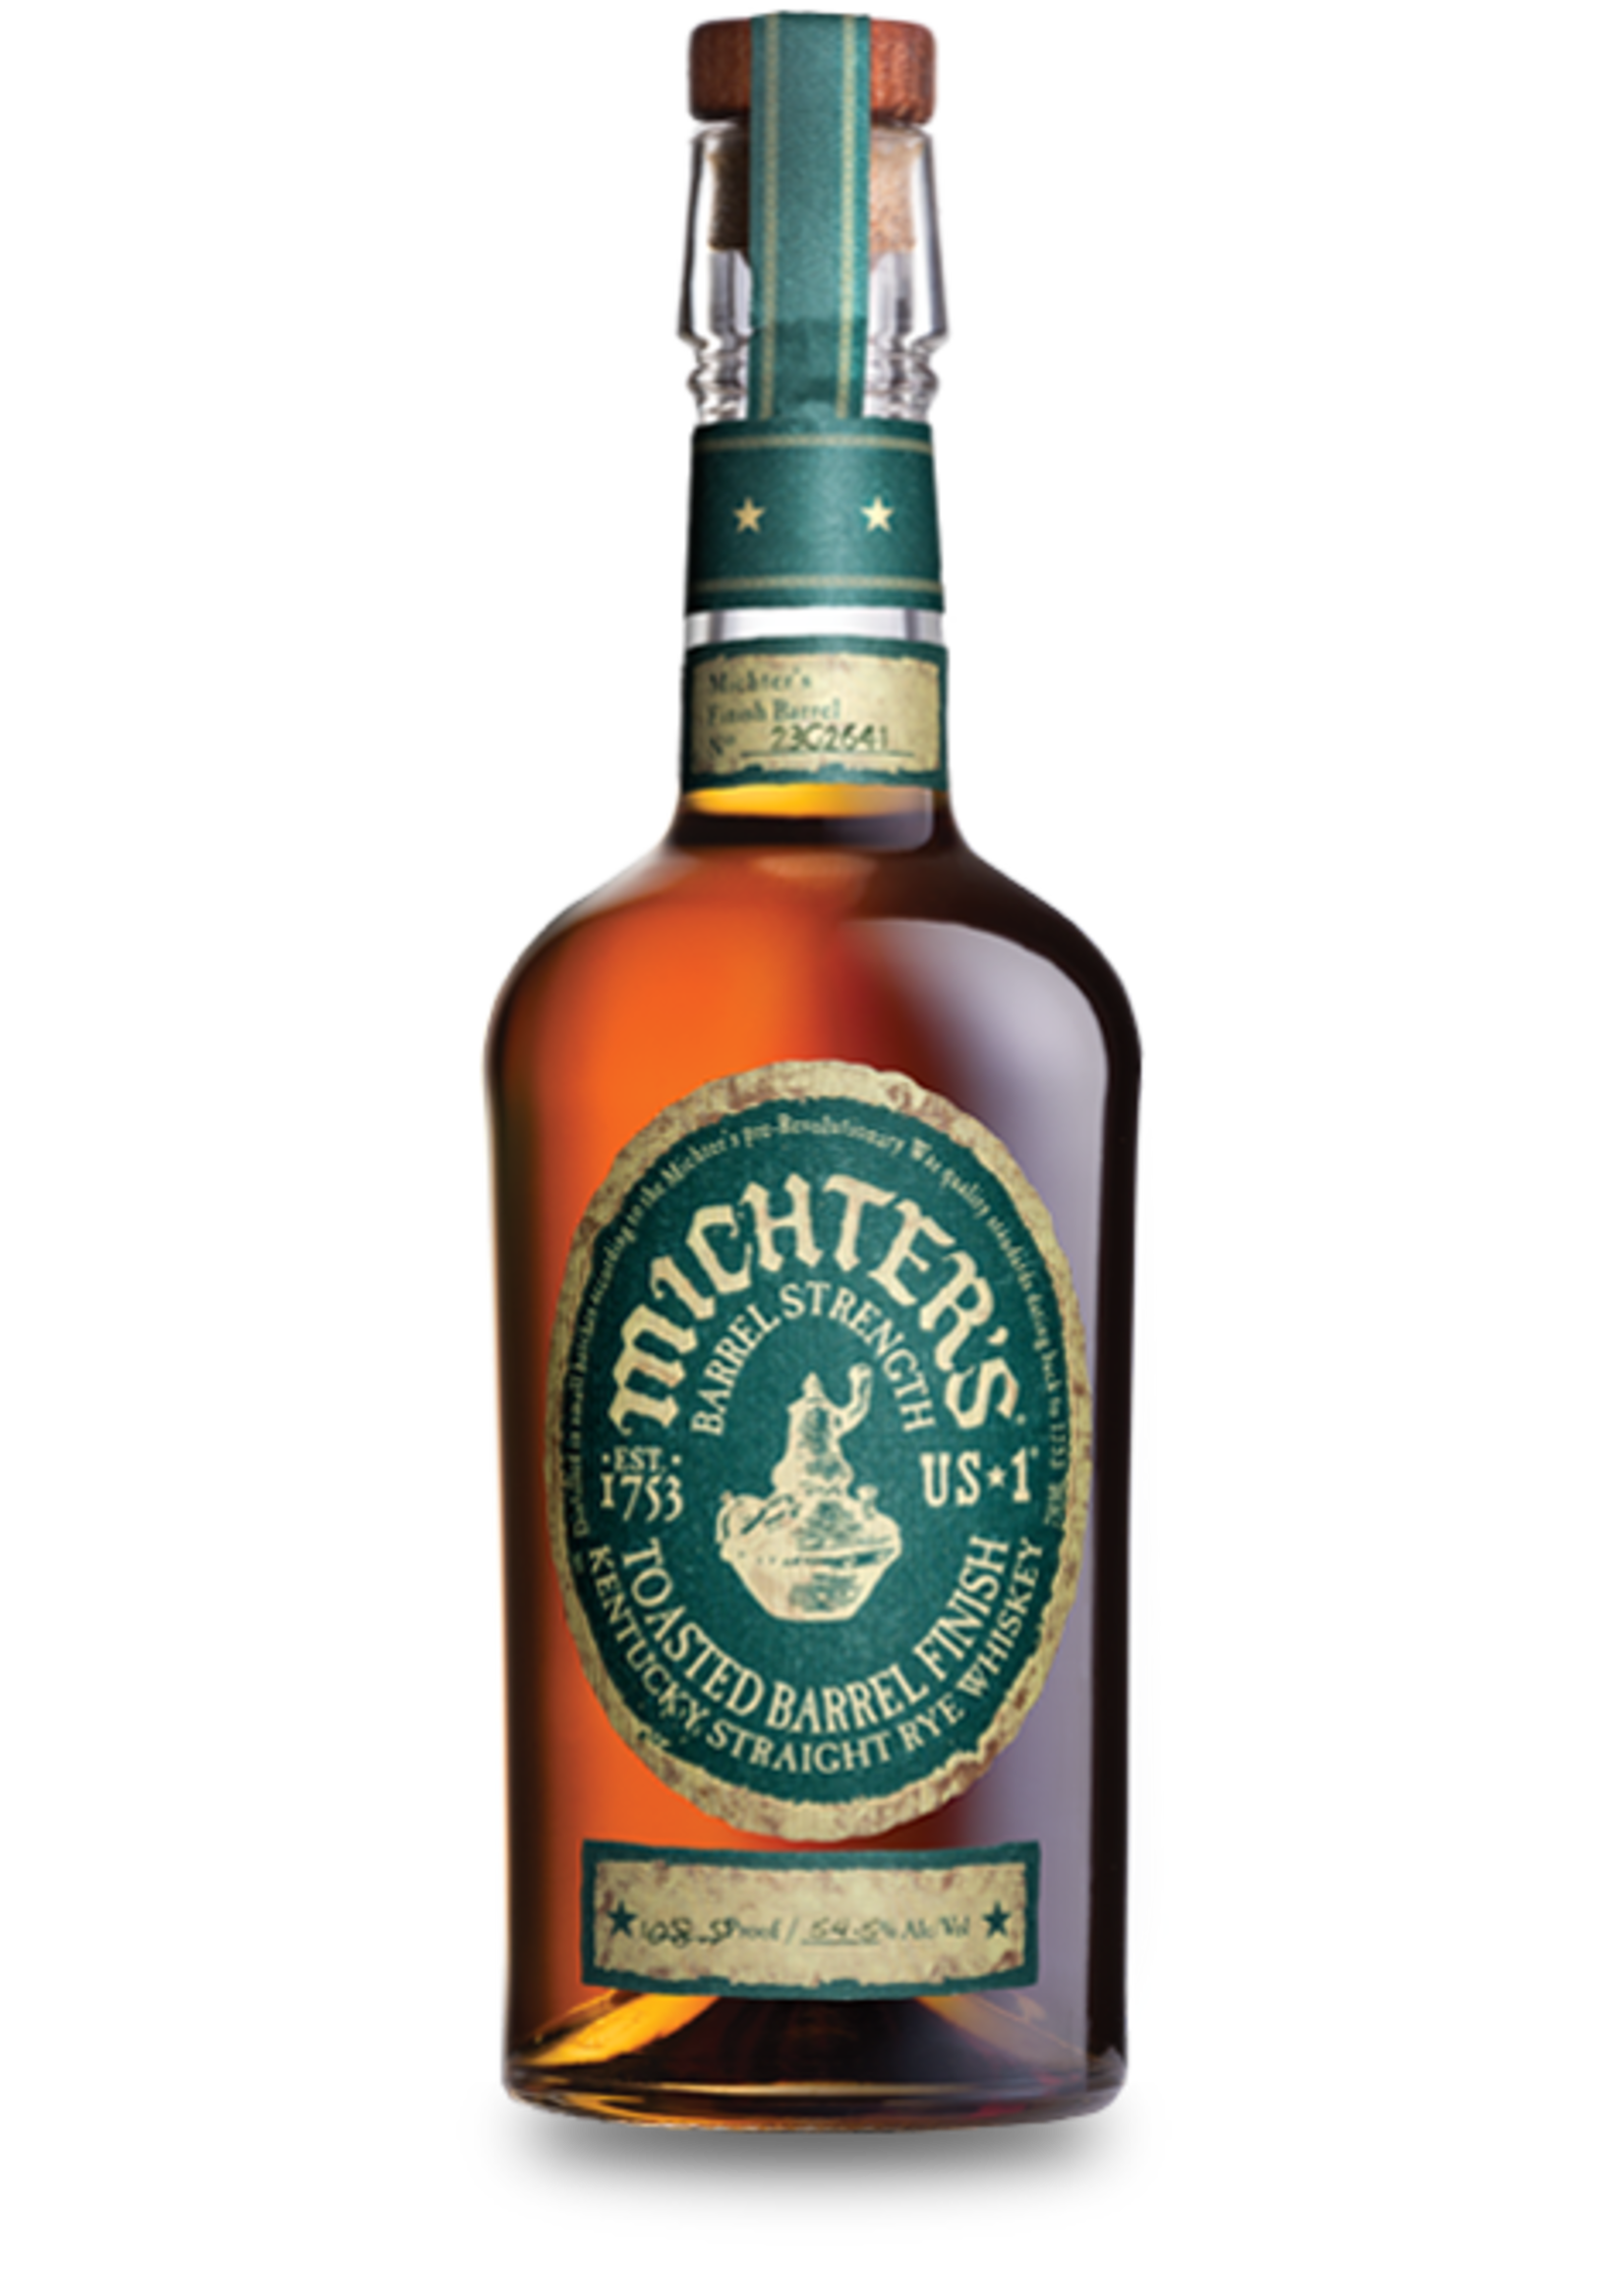 Michters Toasted Straight Rye Whiskey 108.6Proof 750ml